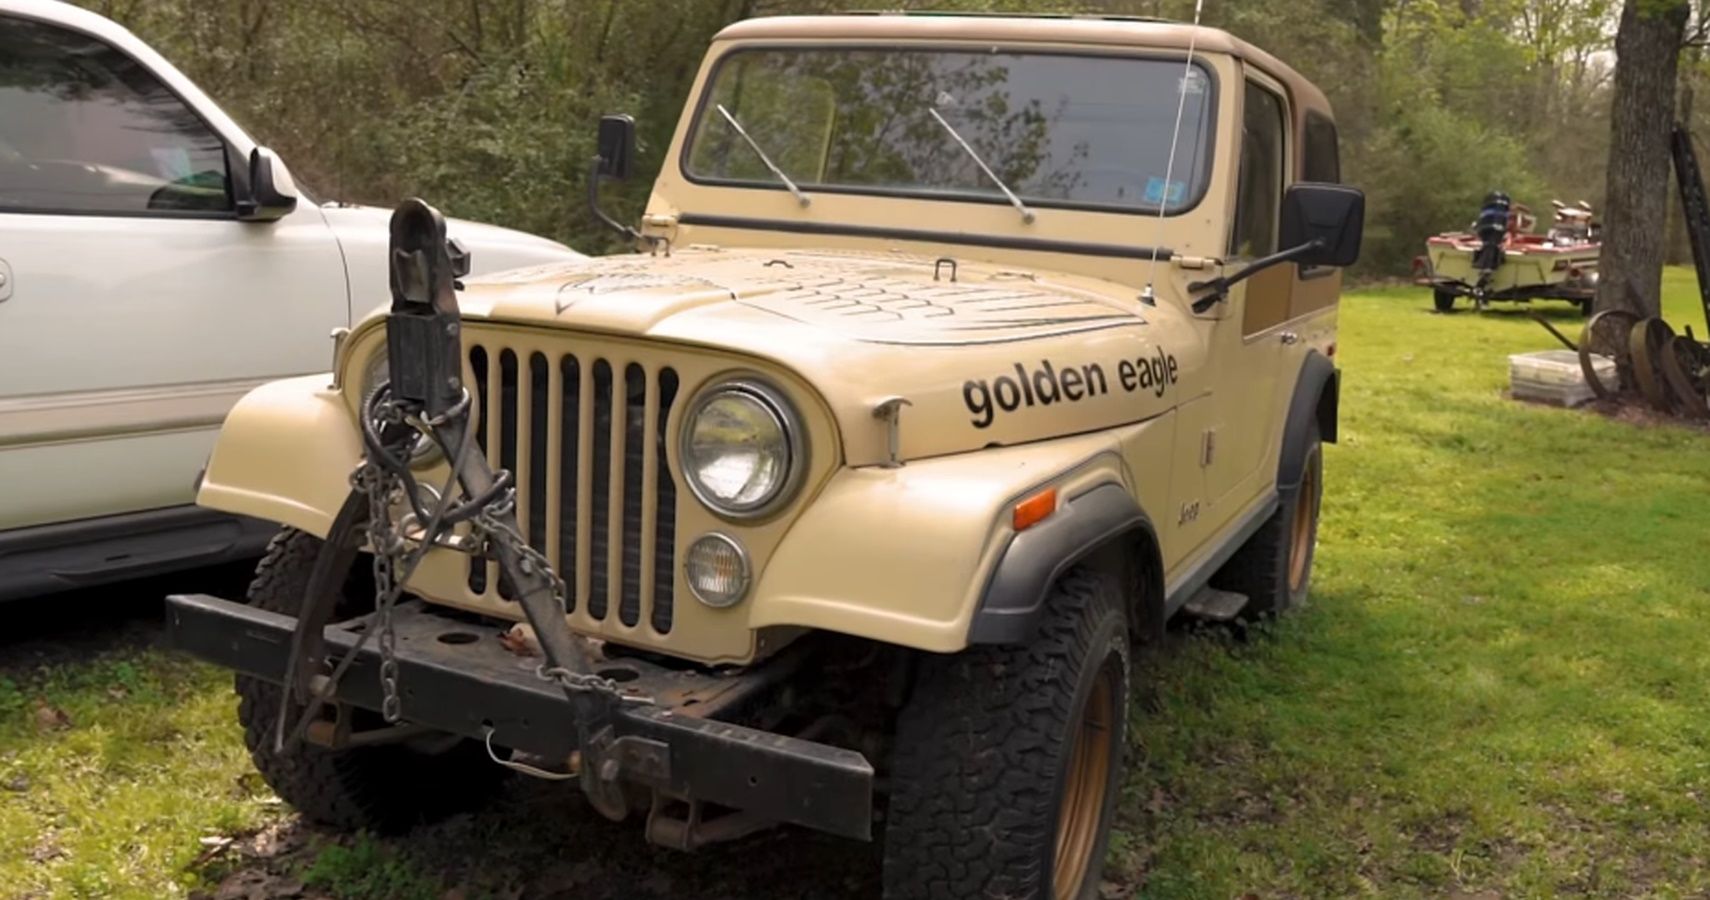 The front view of a tan 1979 Jeep CJ-7 Golden Eagle